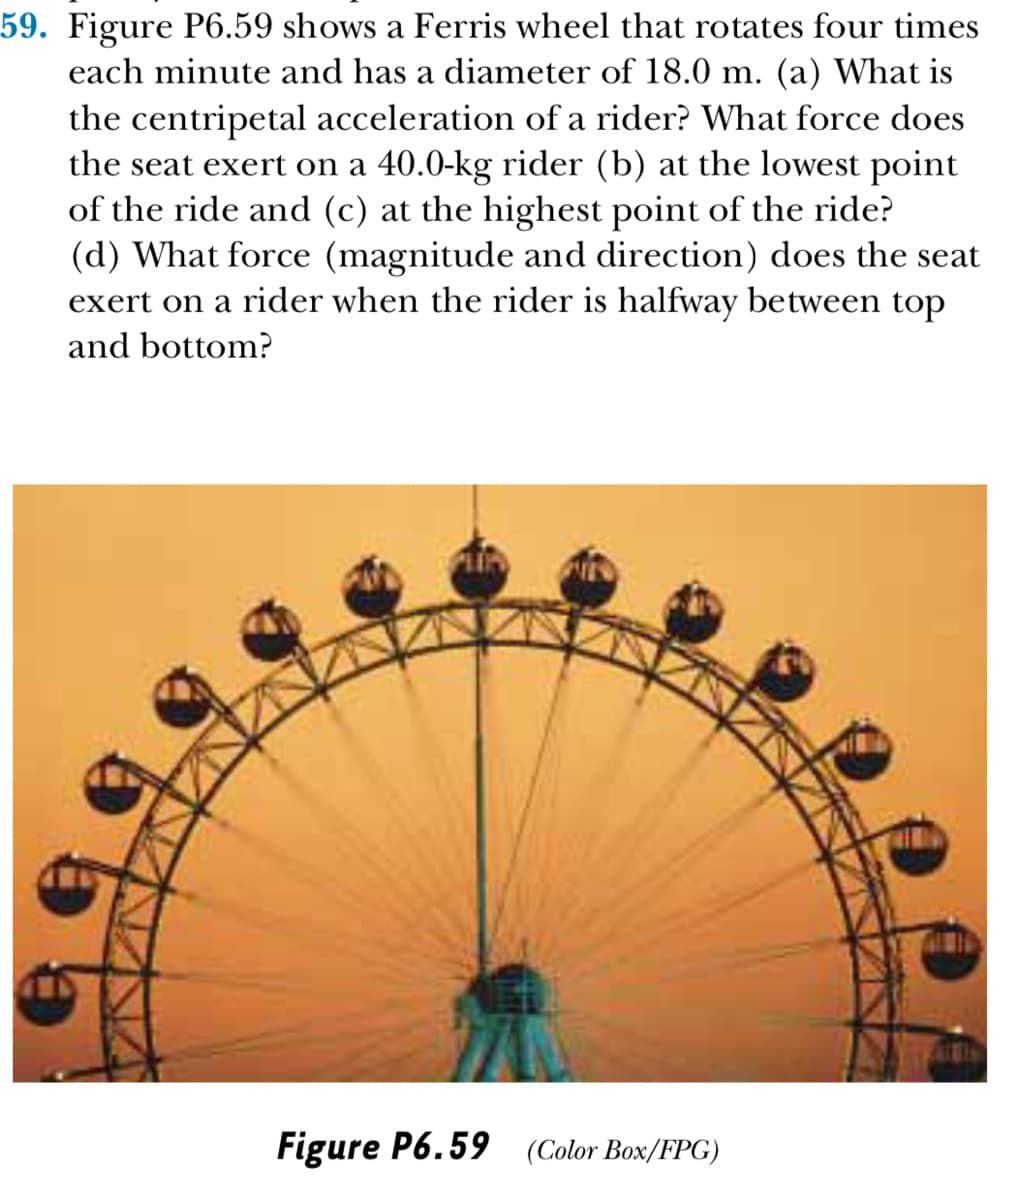 59. Figure P6.59 shows a Ferris wheel that rotates four times
each minute and has a diameter of 18.0 m. (a) What is
the centripetal acceleration of a rider? What force does
the seat exert on a 40.0-kg rider (b) at the lowest point
of the ride and (c) at the highest point of the ride?
(d) What force (magnitude and direction) does the seat
exert on a rider when the rider is halfway between top
and bottom?
Figure P6.59 (Color Box/FPG)
